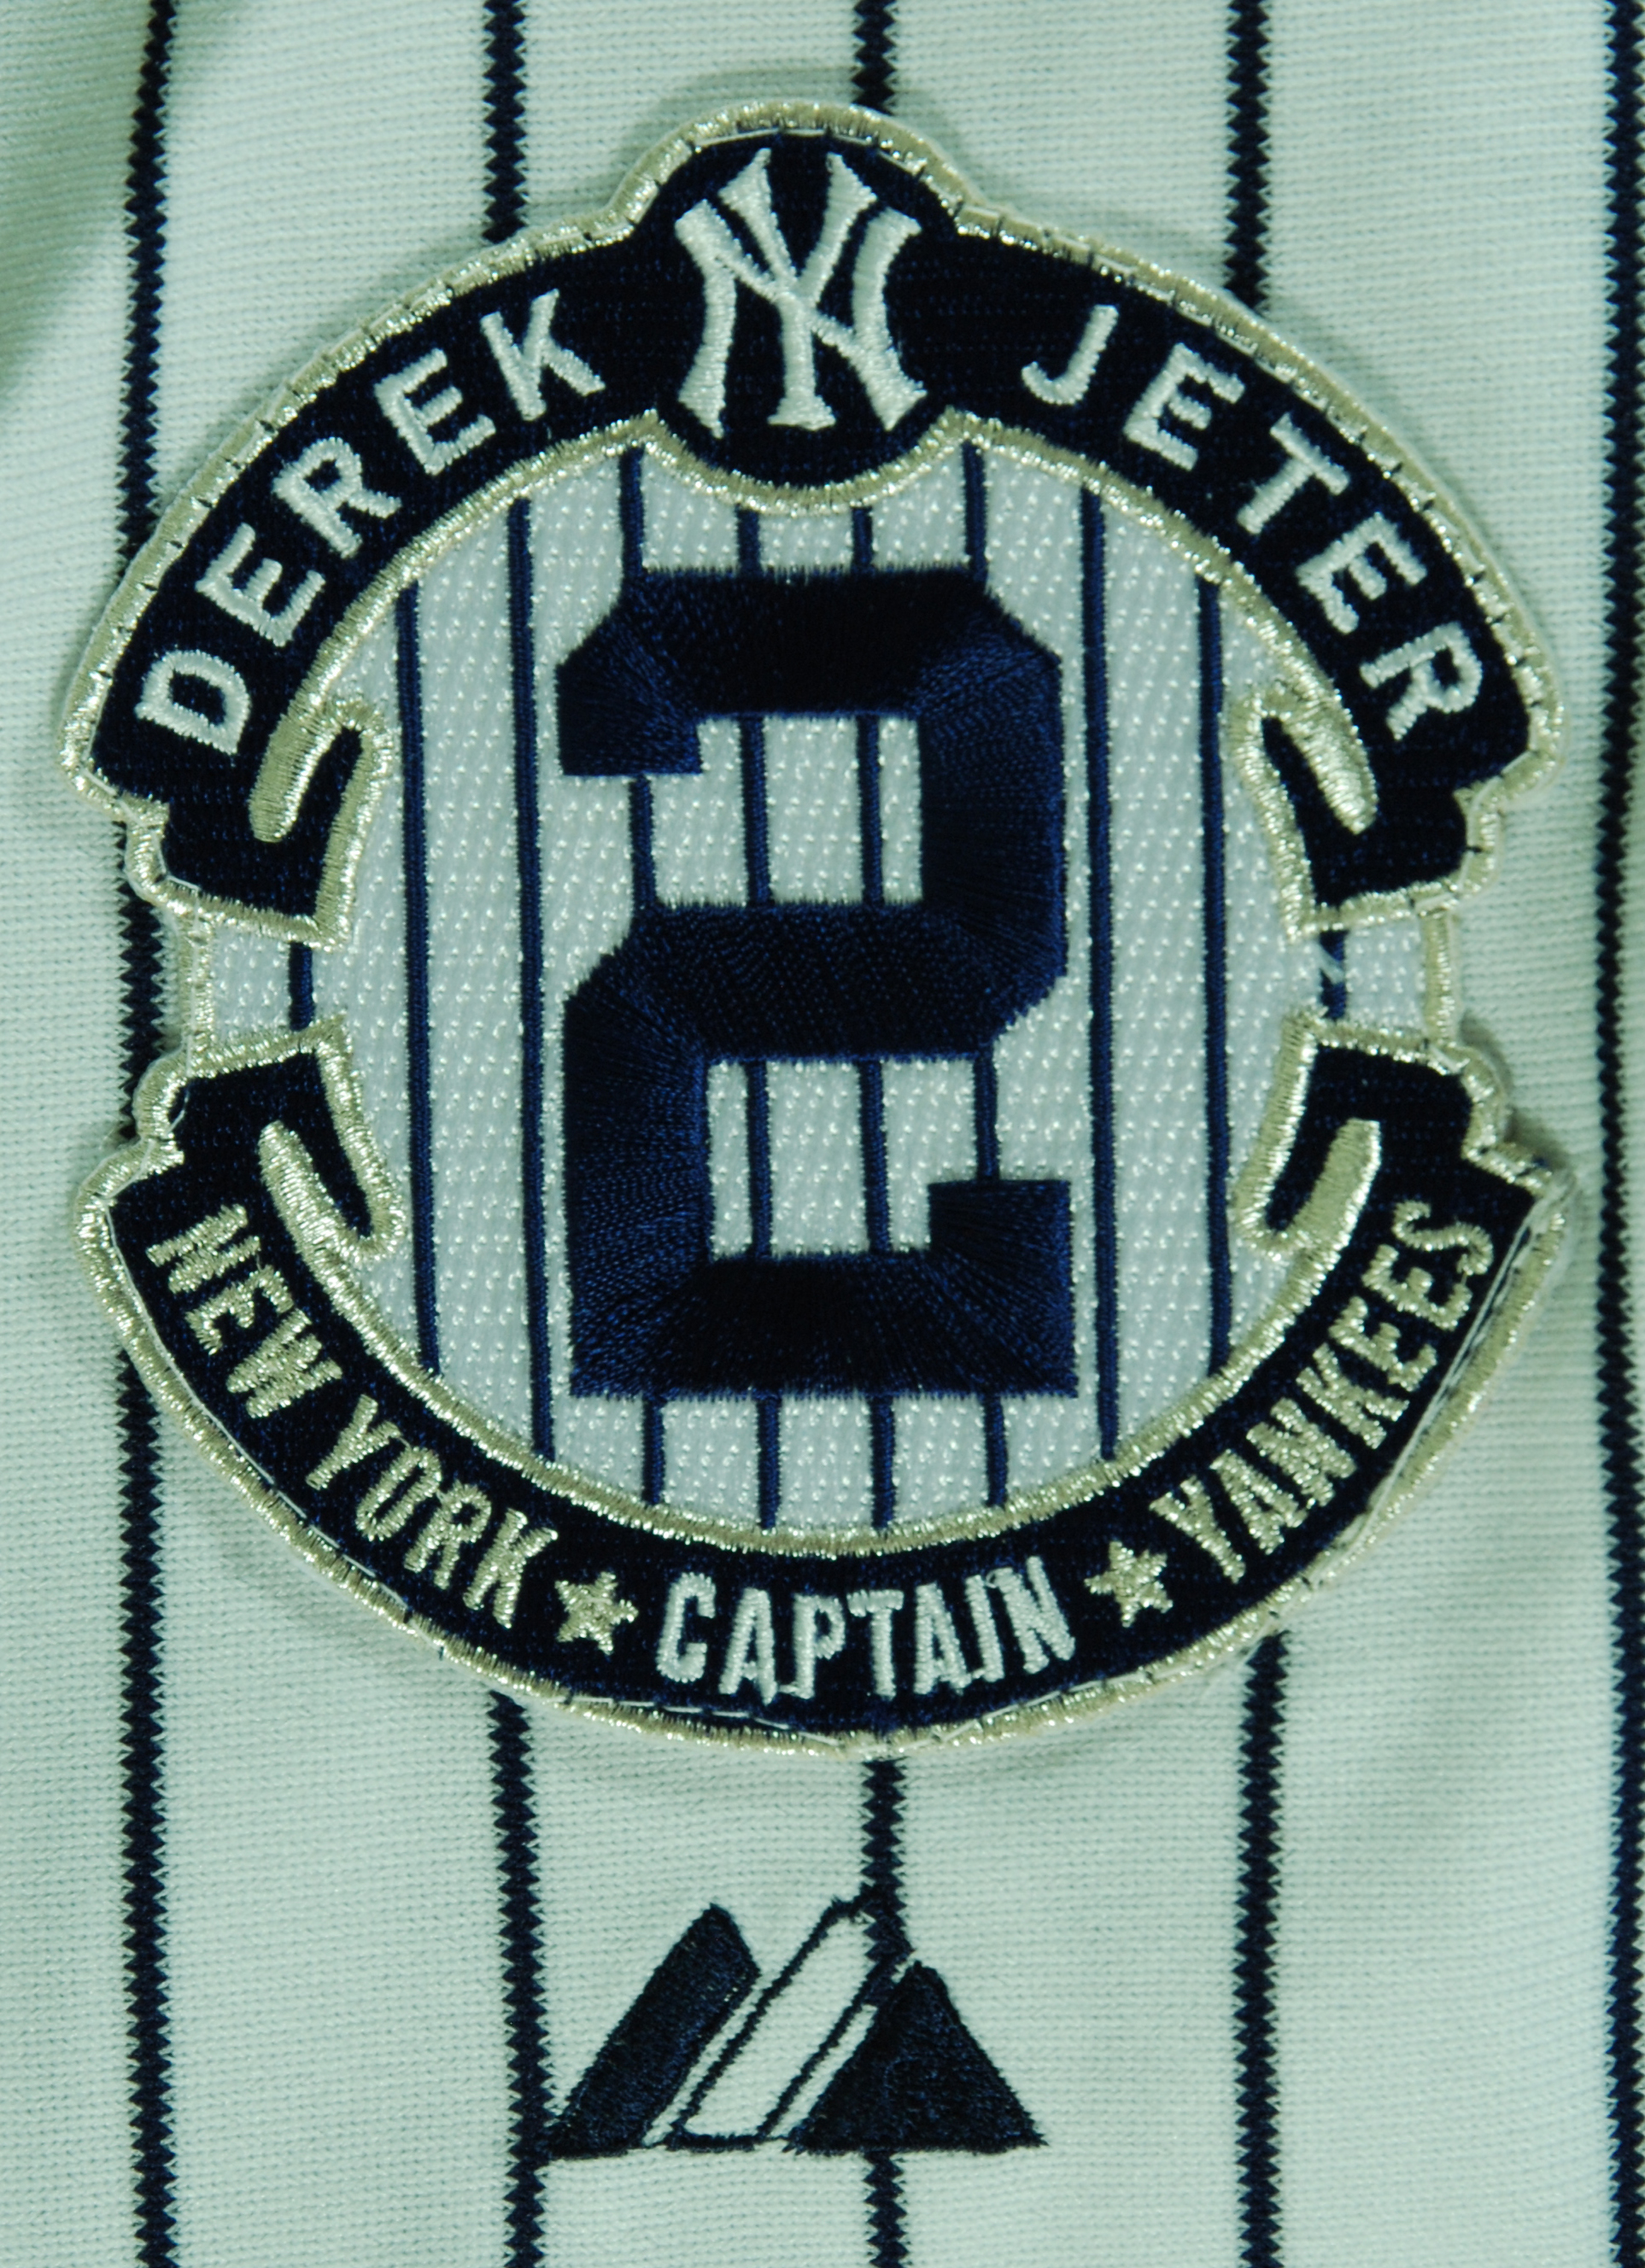 Derek Jeter Signed Authentic Yankees Pinstripe Jersey w/ 2001 WS Patch, 100  Year AL Patch, Black Armband & American Flag Patch (MLB Auth)